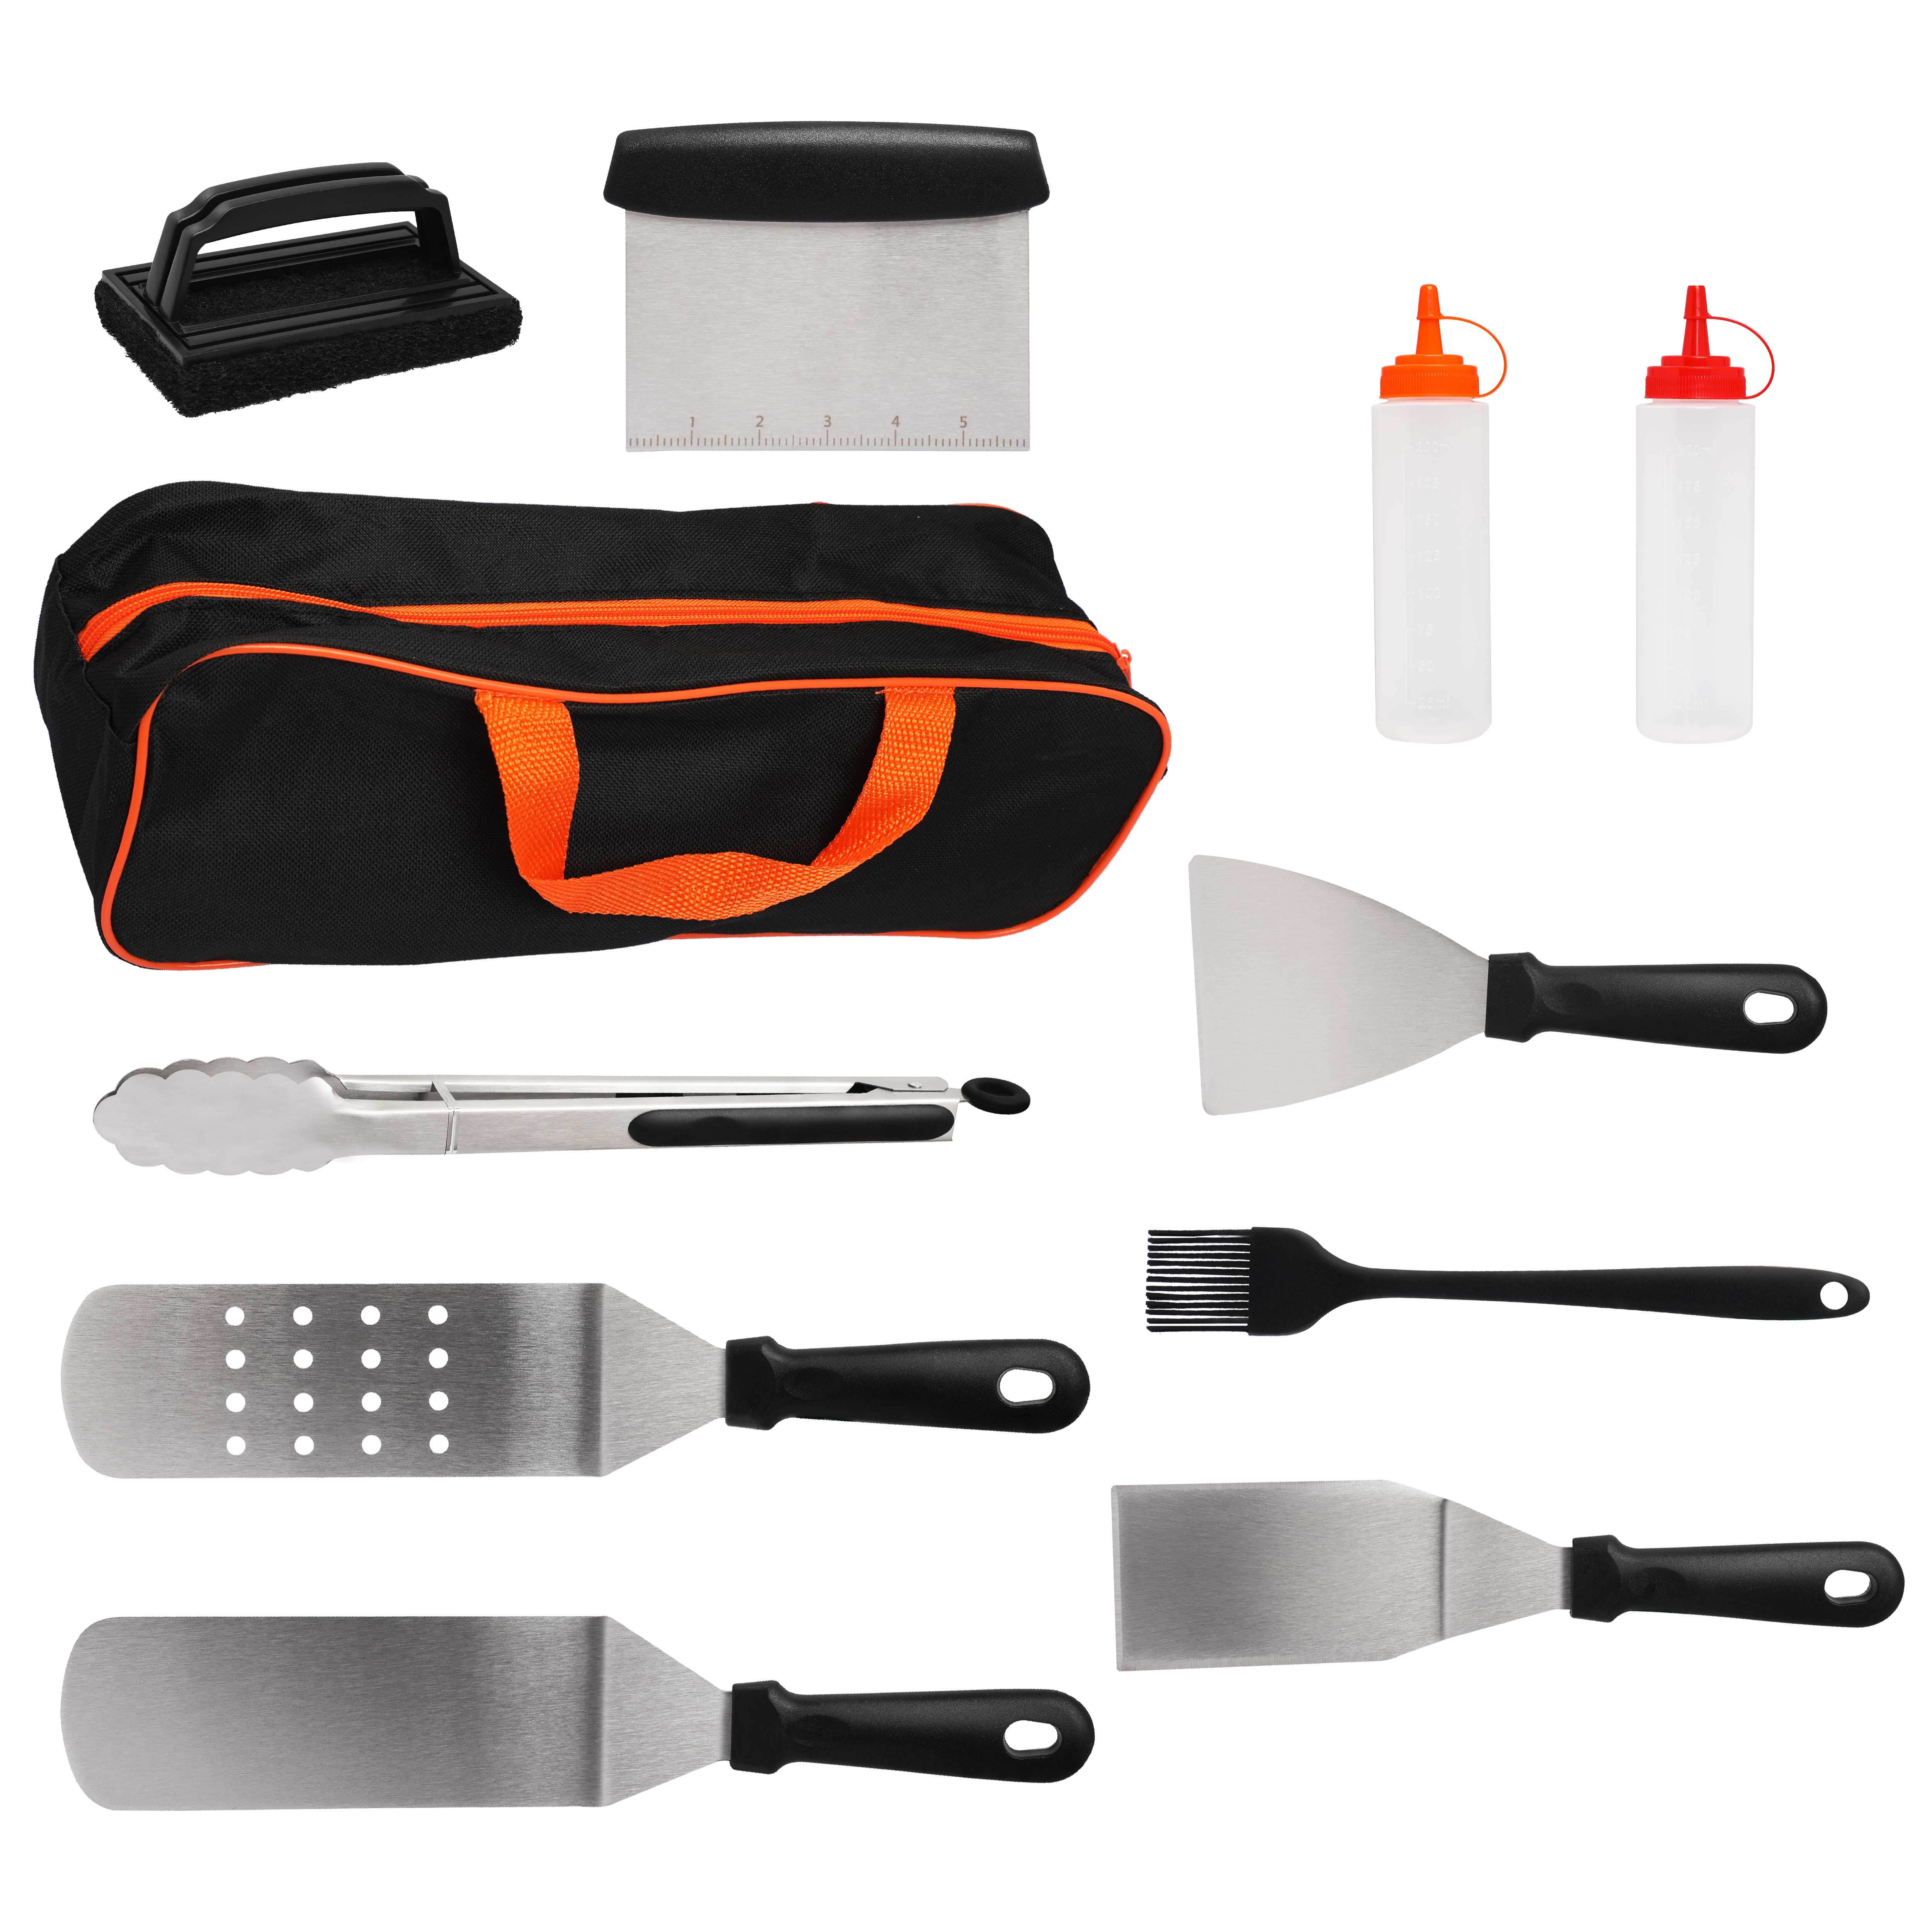 

Dr. Camp 11 Pcs Grill Set, Bbq Tools Set, Grill Accesories, All In 1 Grill Set With Stainless Steel Material